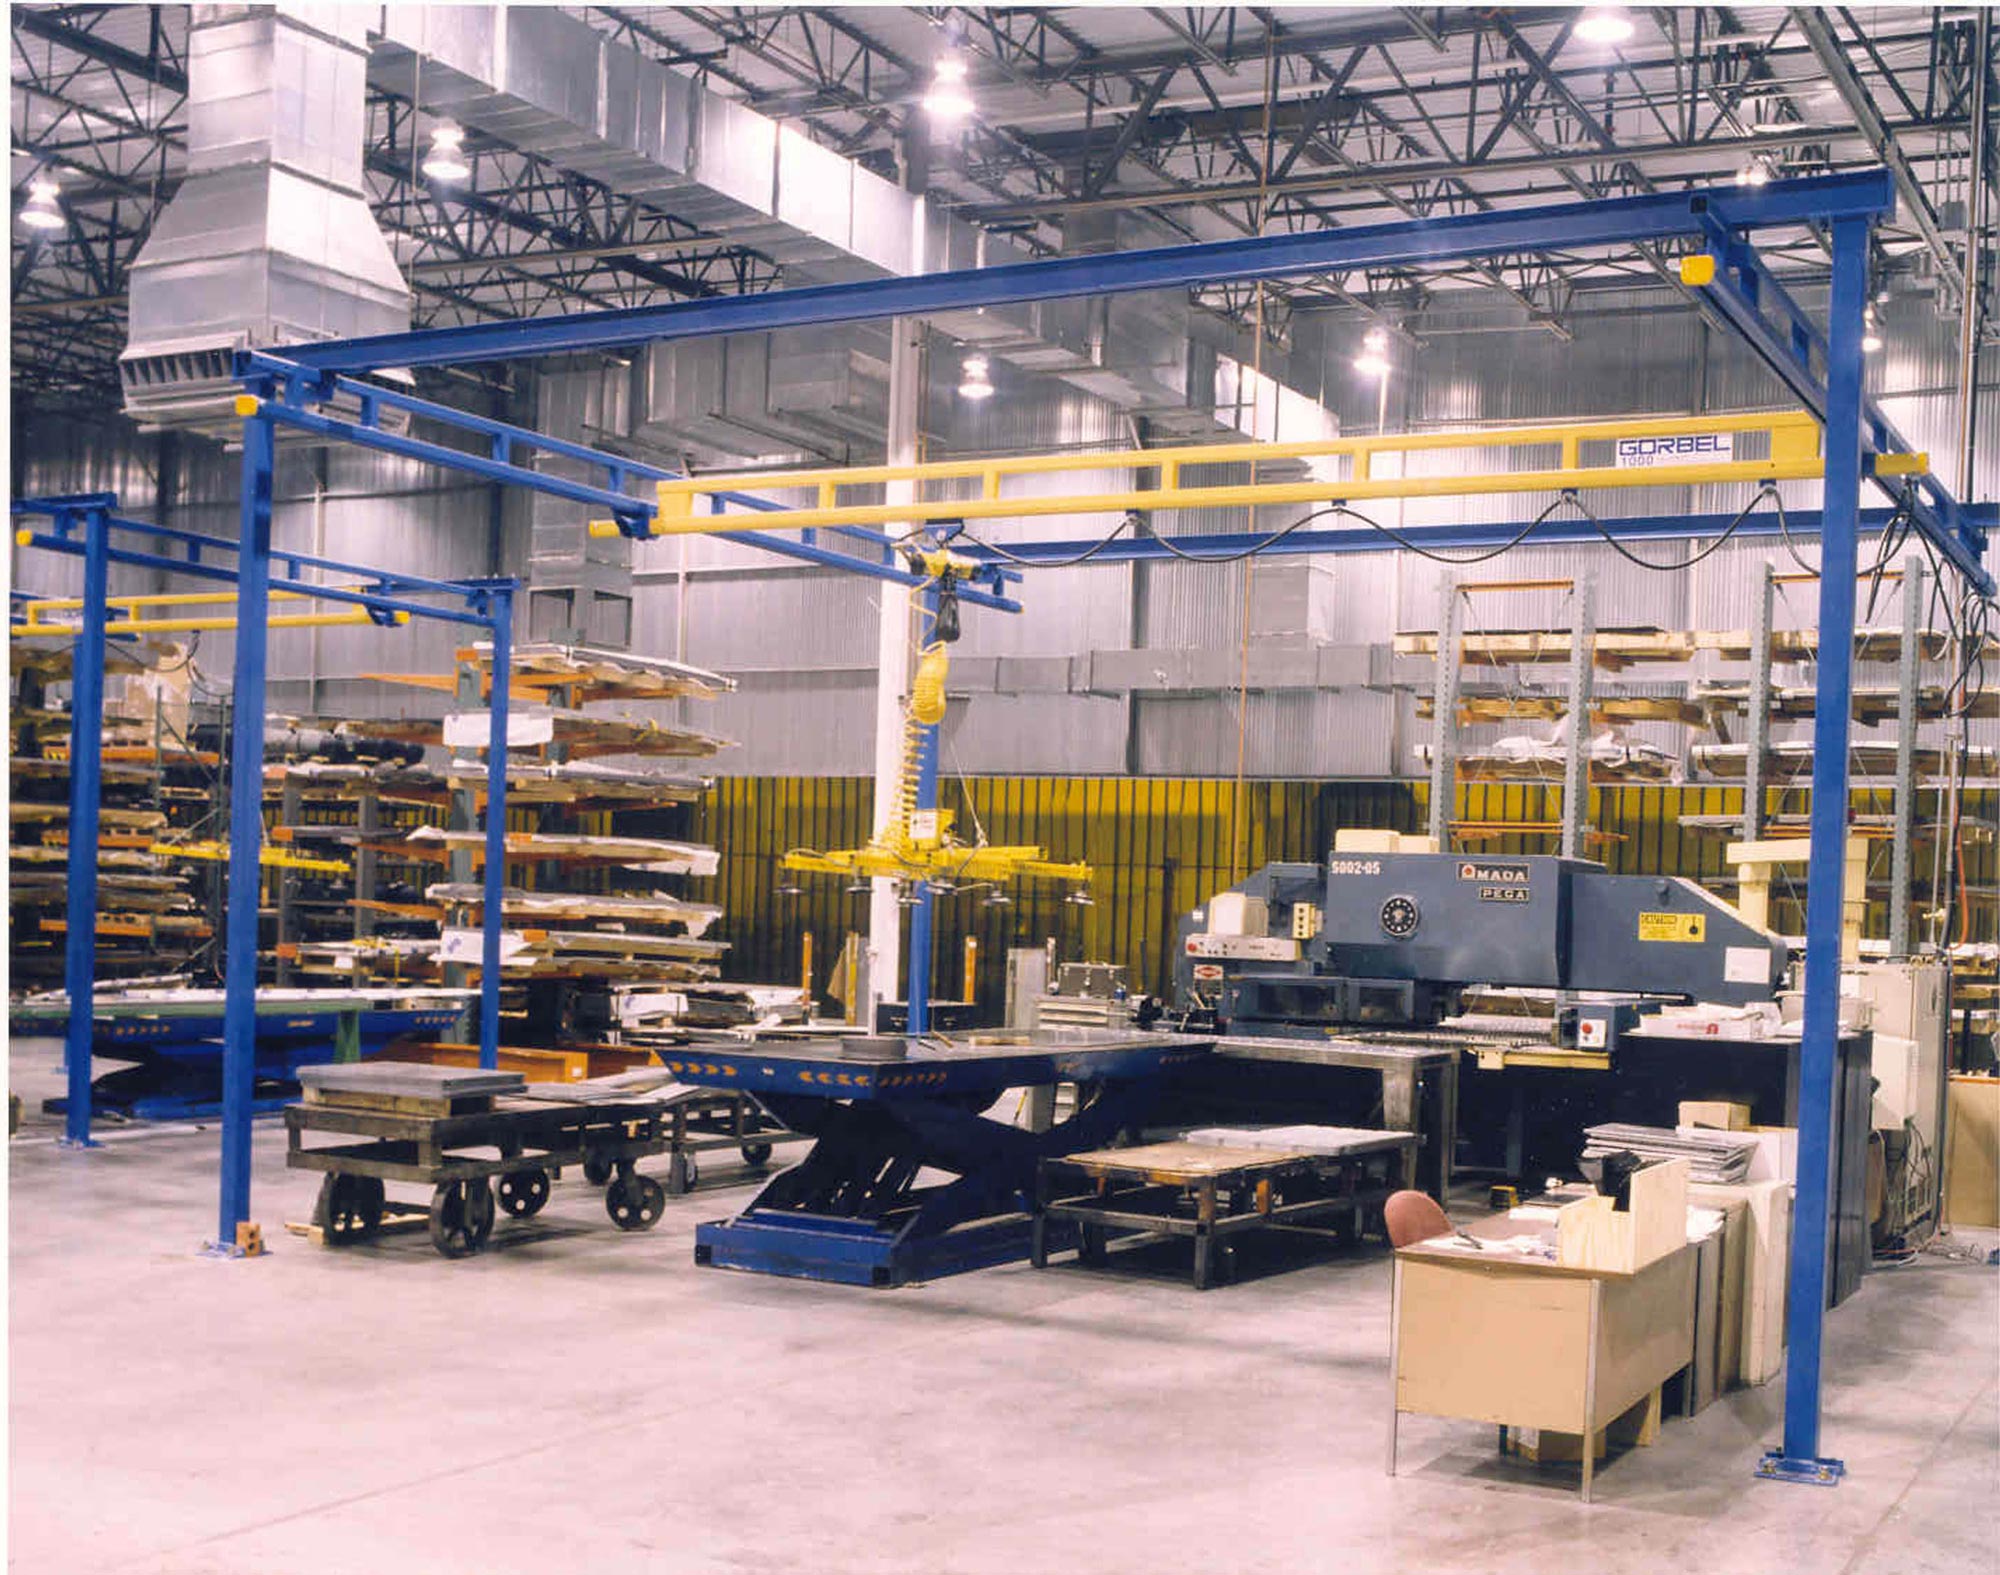 A 1000lb capacity freestanding bridge crane manufactured by Gorbel, distributed by Harriman Material Handling